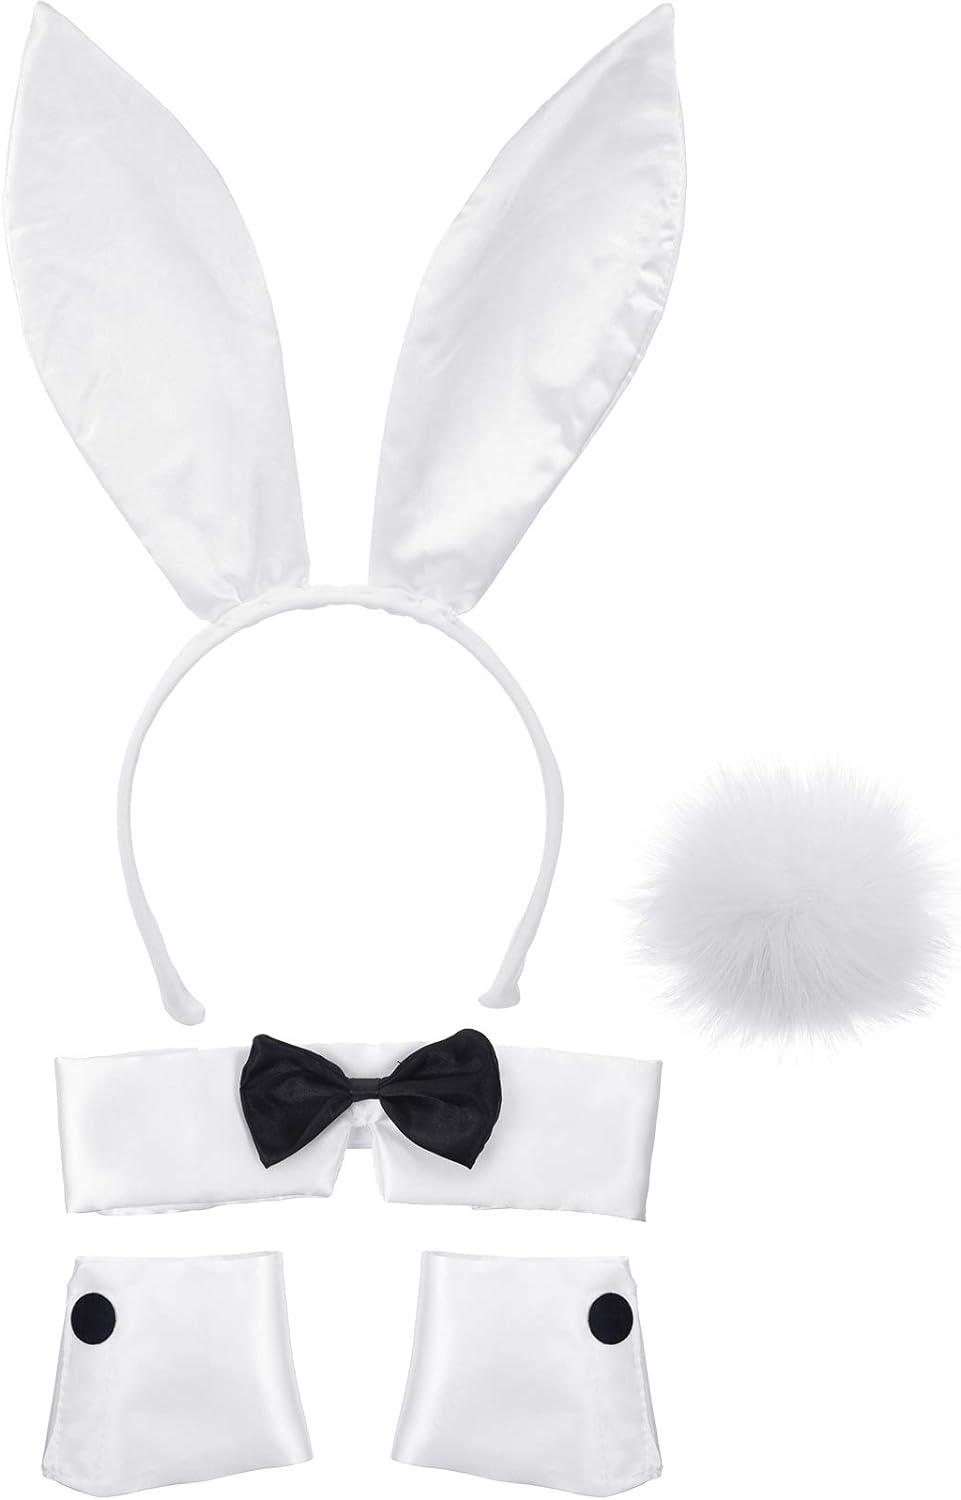 Bunny Accessory Set Rabbit Ear Headband Bow Tie Cuffs Tail for Costume Party - Lasercutwraps Shop